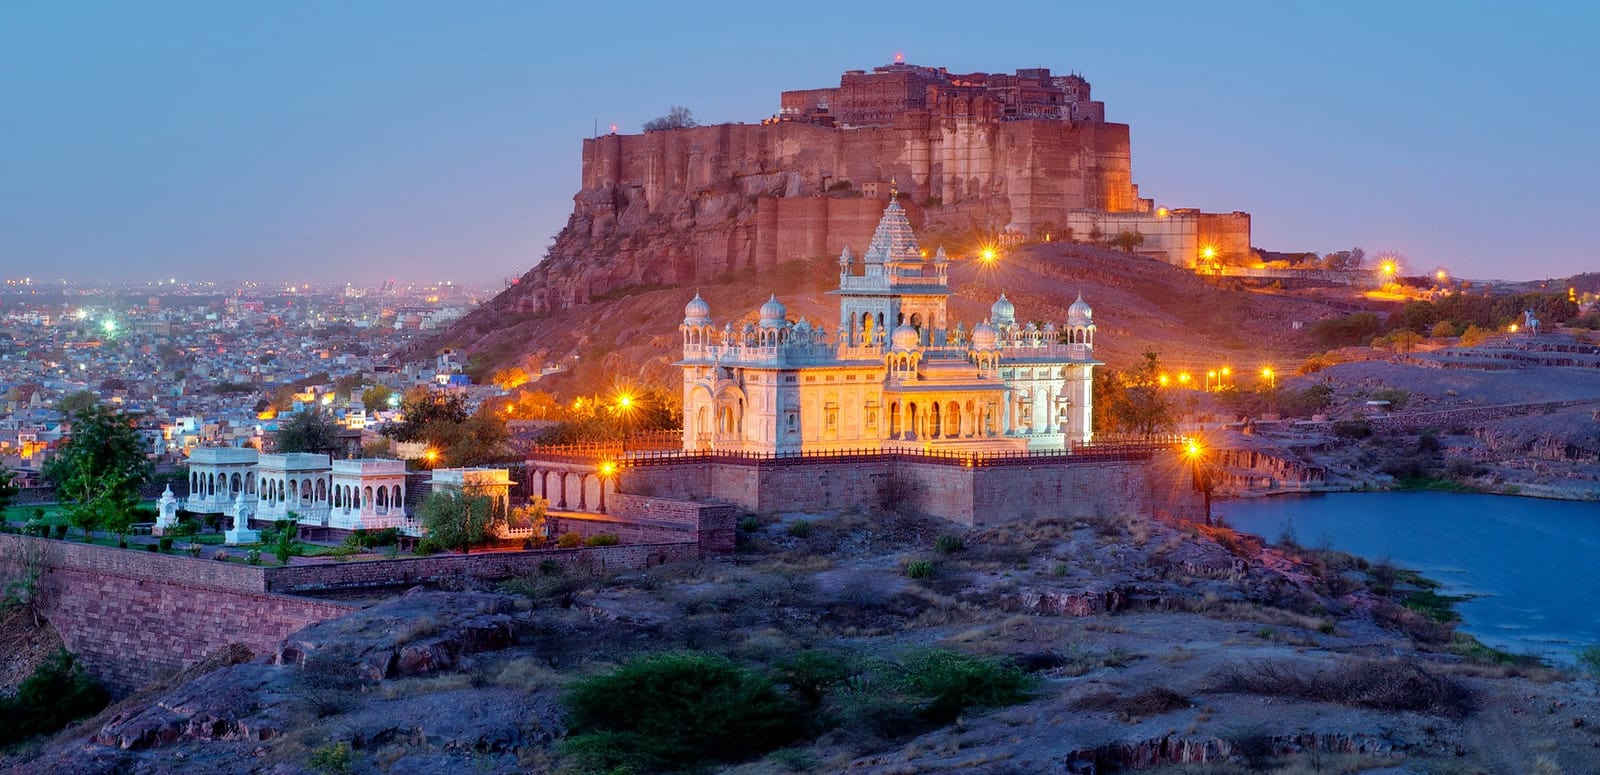 Tourist place in Rajasthan